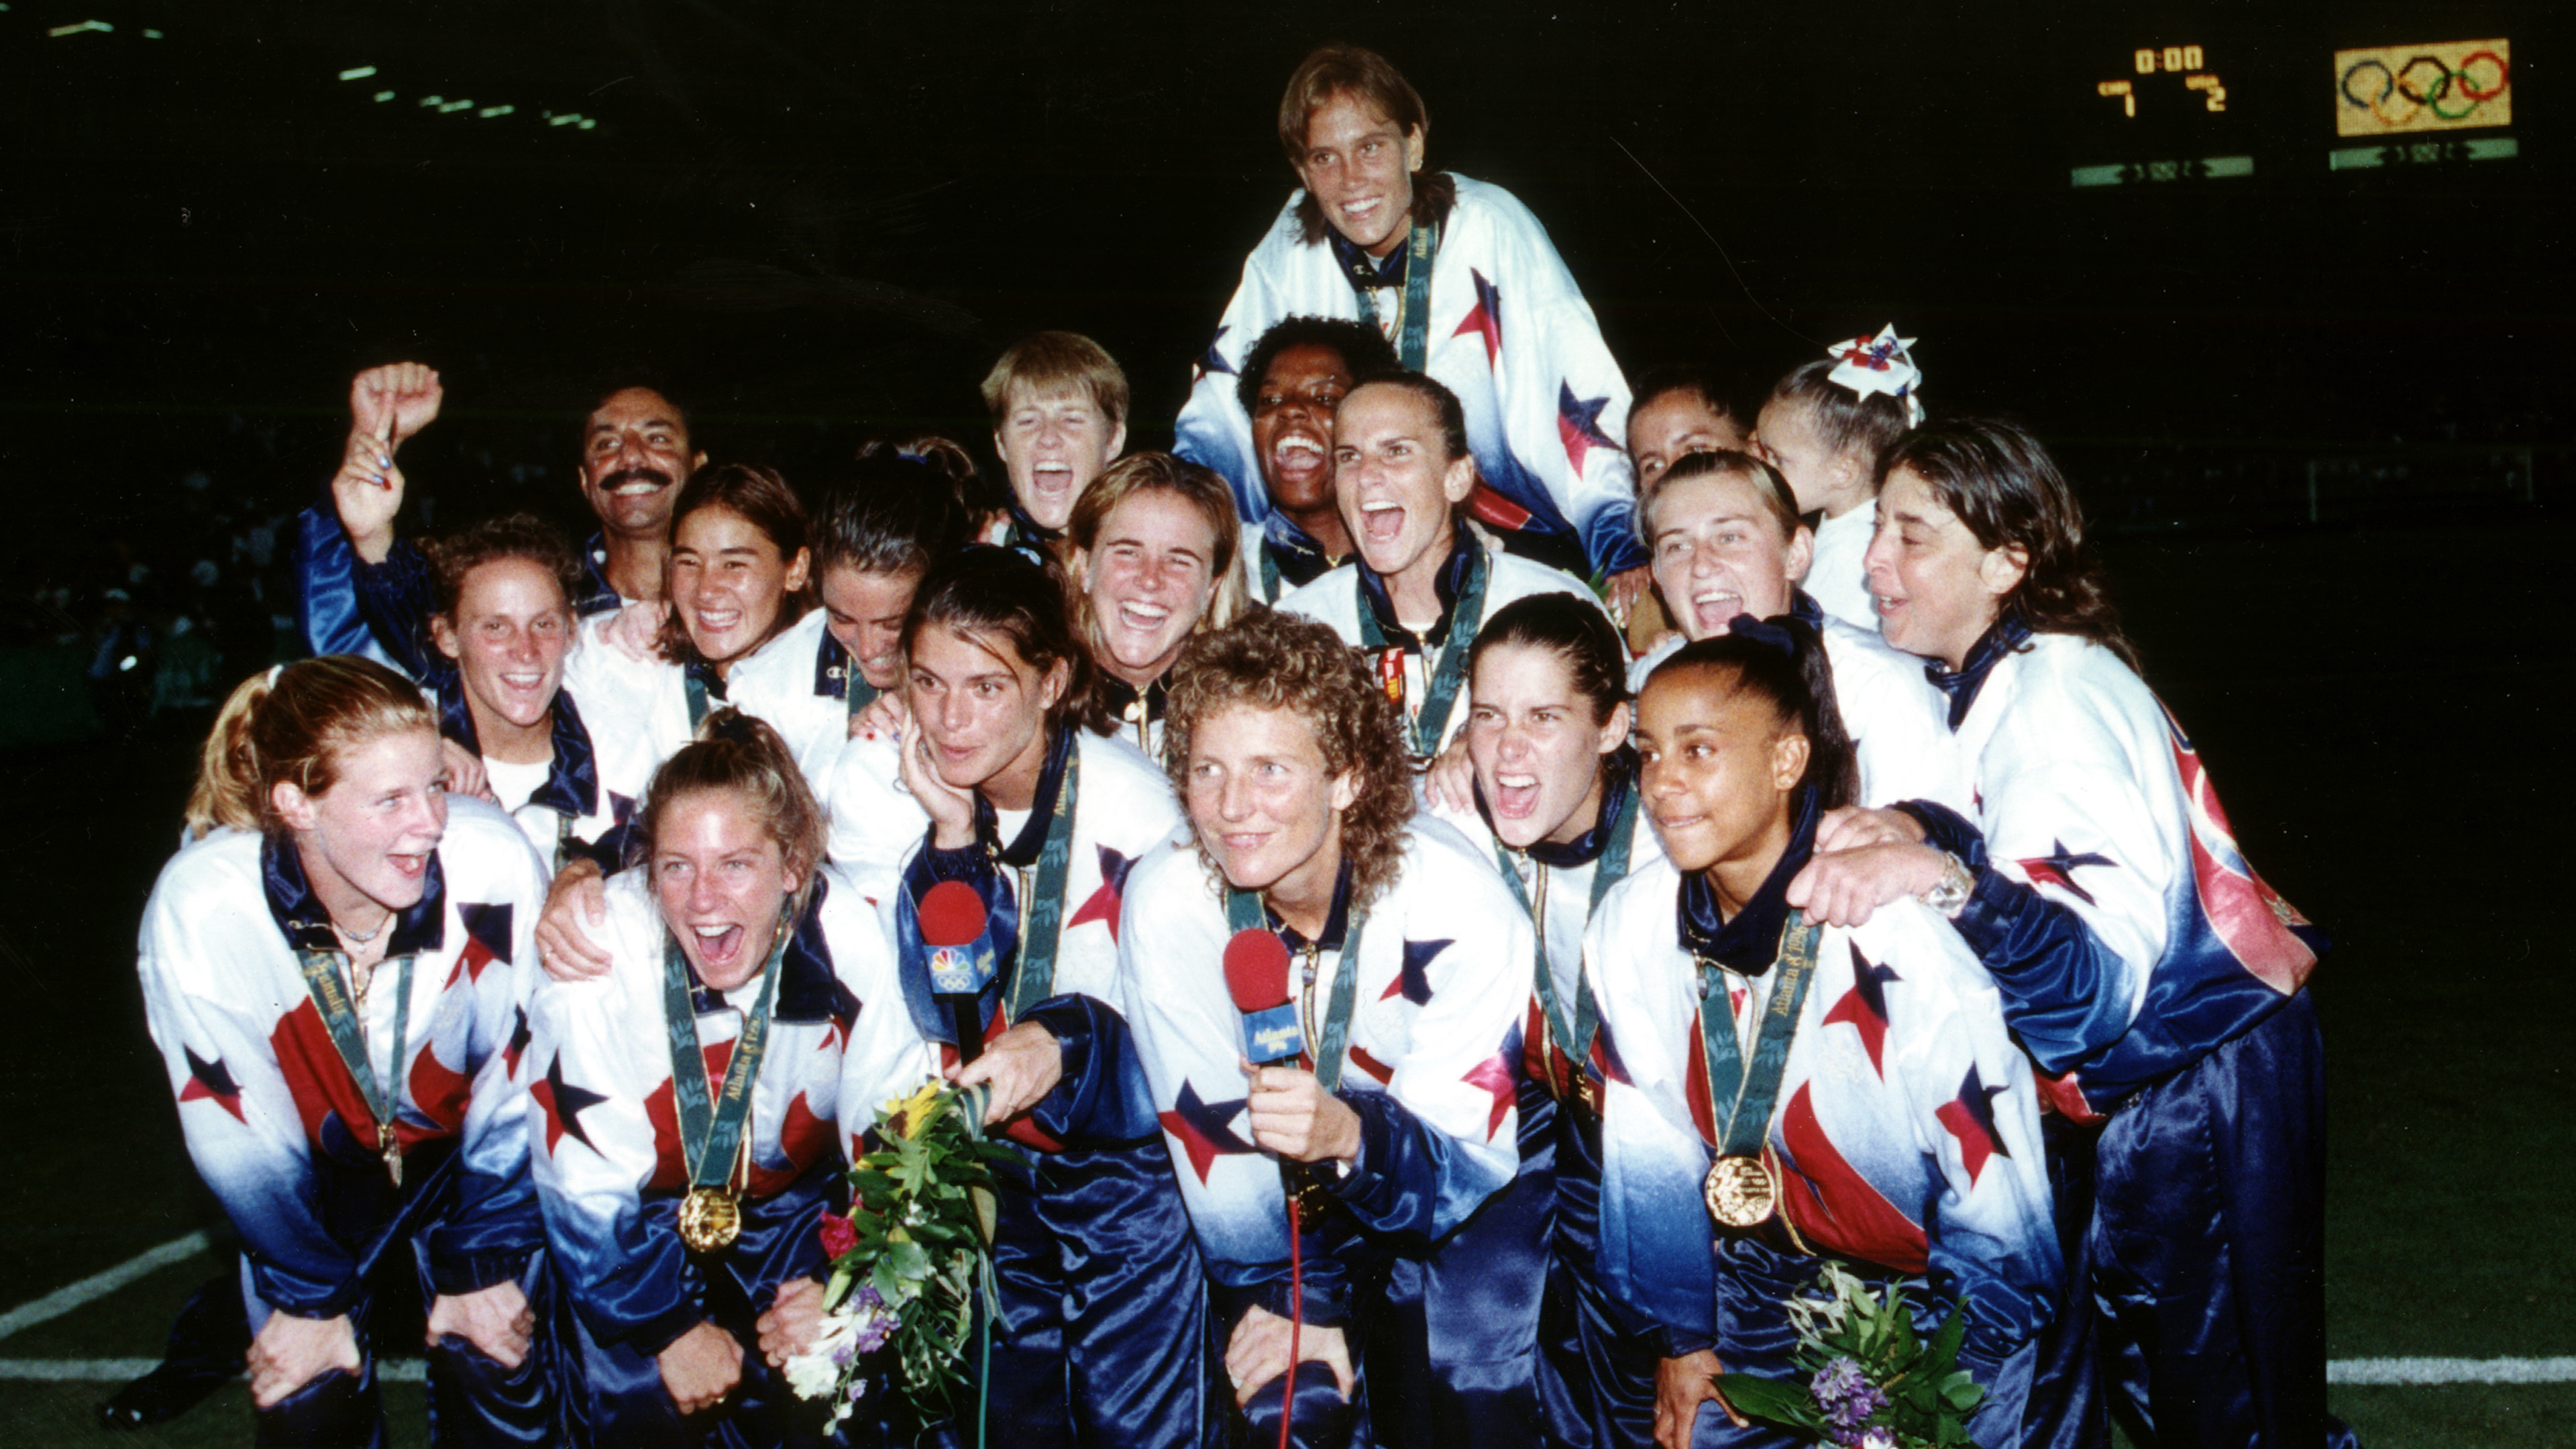 On this date: USA Basketball wins gold at 1996 Olympics in Atlanta